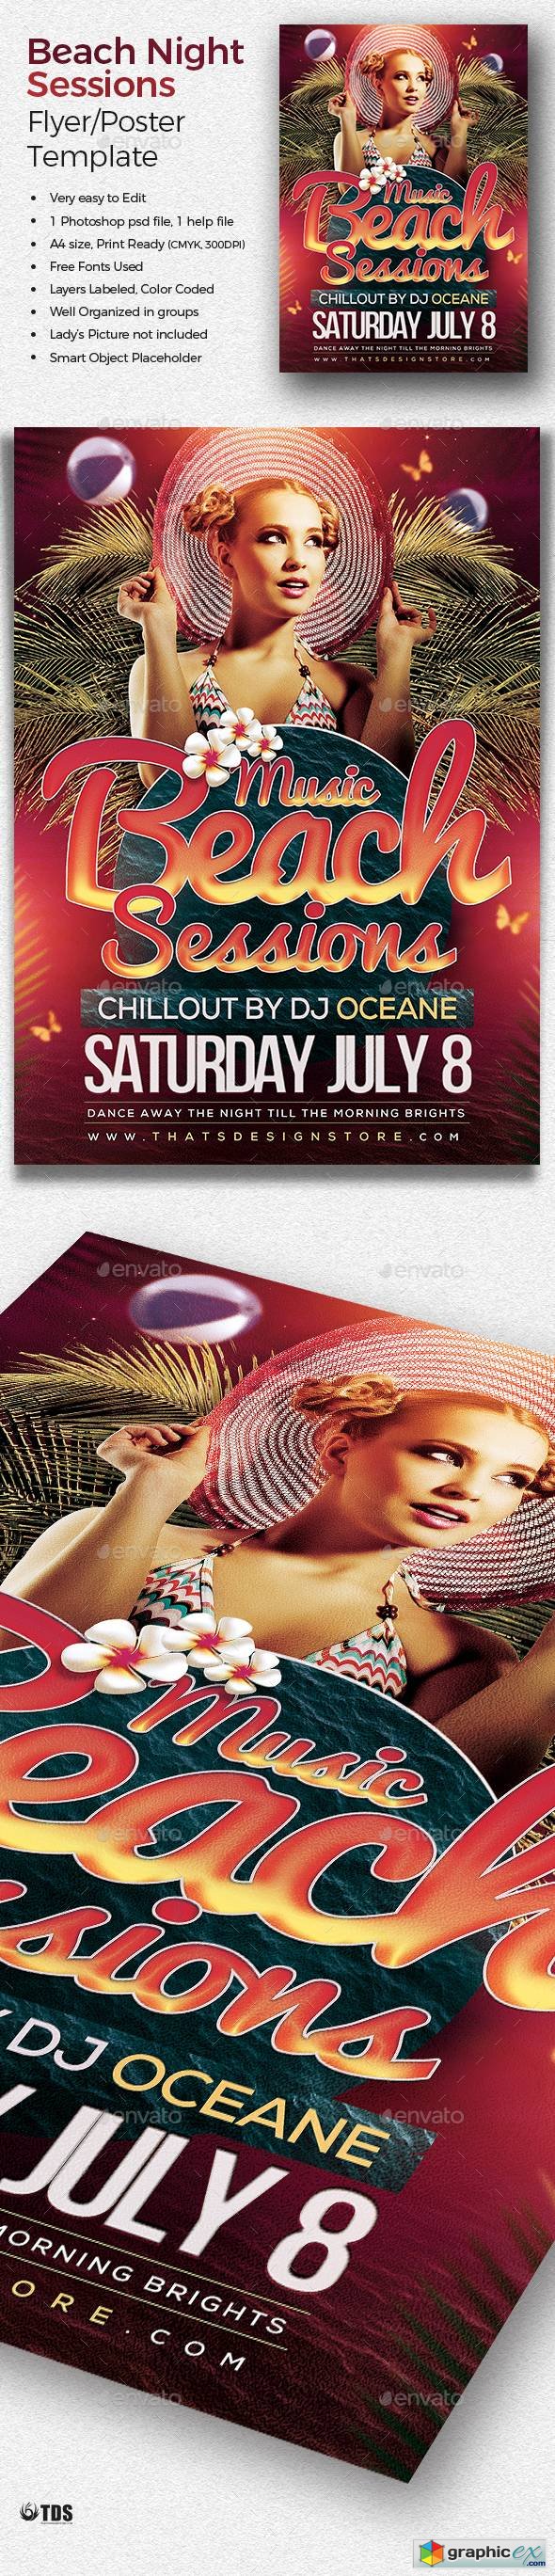 Beach Night Sessions Flyer Template